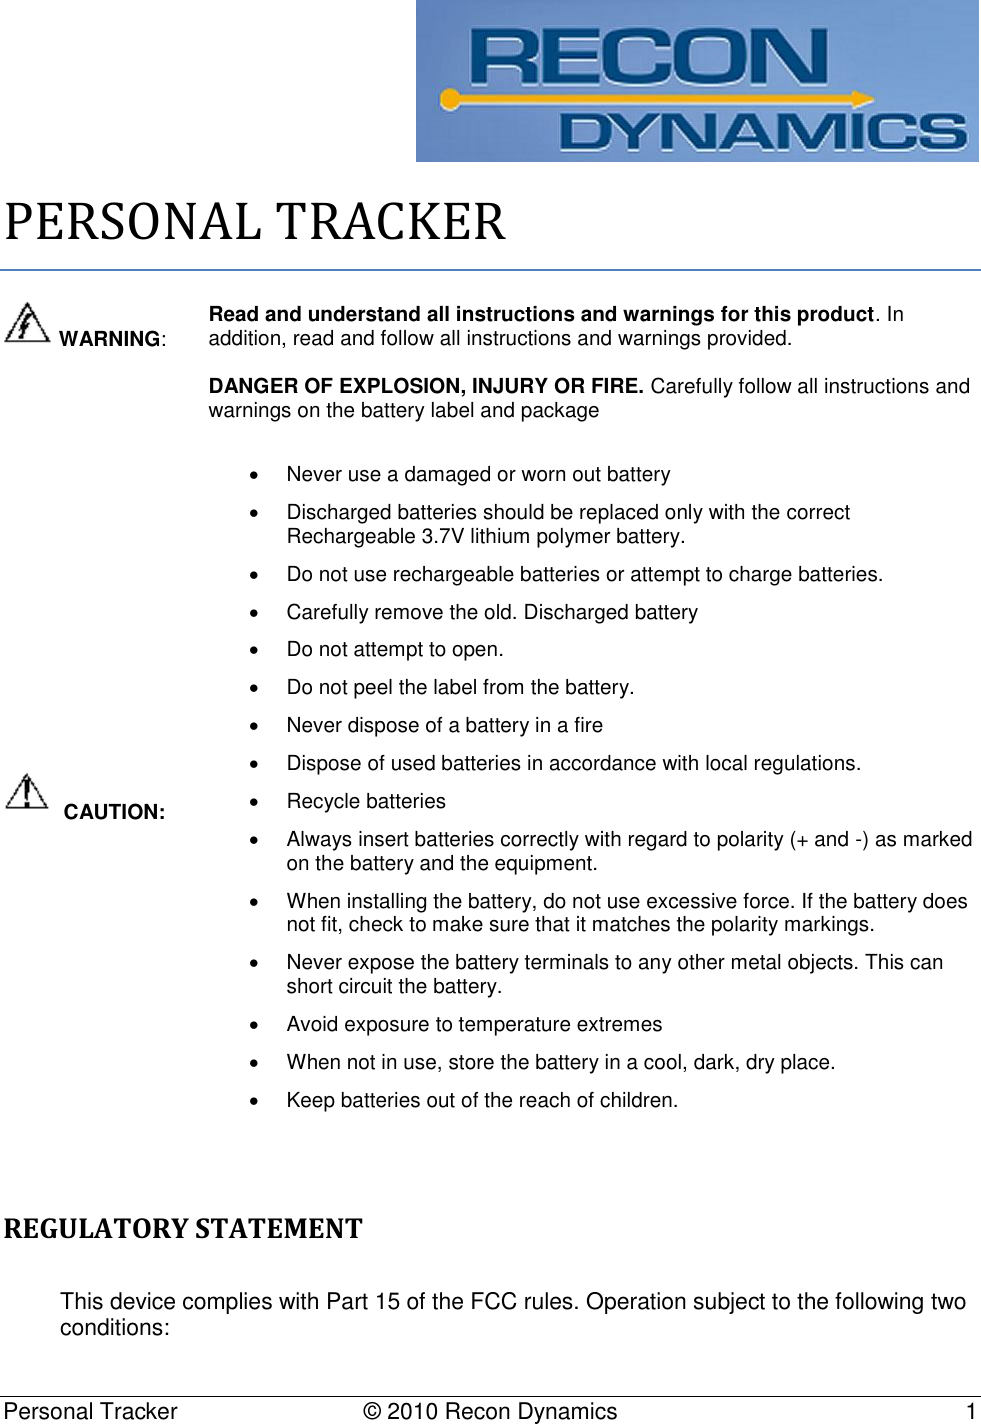   Personal Tracker   © 2010 Recon Dynamics  1   PERSONAL TRACKER  WARNING: Read and understand all instructions and warnings for this product. In addition, read and follow all instructions and warnings provided.  DANGER OF EXPLOSION, INJURY OR FIRE. Carefully follow all instructions and warnings on the battery label and package   CAUTION:   Never use a damaged or worn out battery   Discharged batteries should be replaced only with the correct Rechargeable 3.7V lithium polymer battery.    Do not use rechargeable batteries or attempt to charge batteries.   Carefully remove the old. Discharged battery   Do not attempt to open.   Do not peel the label from the battery.   Never dispose of a battery in a fire   Dispose of used batteries in accordance with local regulations.   Recycle batteries   Always insert batteries correctly with regard to polarity (+ and -) as marked on the battery and the equipment.   When installing the battery, do not use excessive force. If the battery does not fit, check to make sure that it matches the polarity markings.   Never expose the battery terminals to any other metal objects. This can short circuit the battery.   Avoid exposure to temperature extremes   When not in use, store the battery in a cool, dark, dry place.   Keep batteries out of the reach of children.  REGULATORY STATEMENT This device complies with Part 15 of the FCC rules. Operation subject to the following two conditions:  